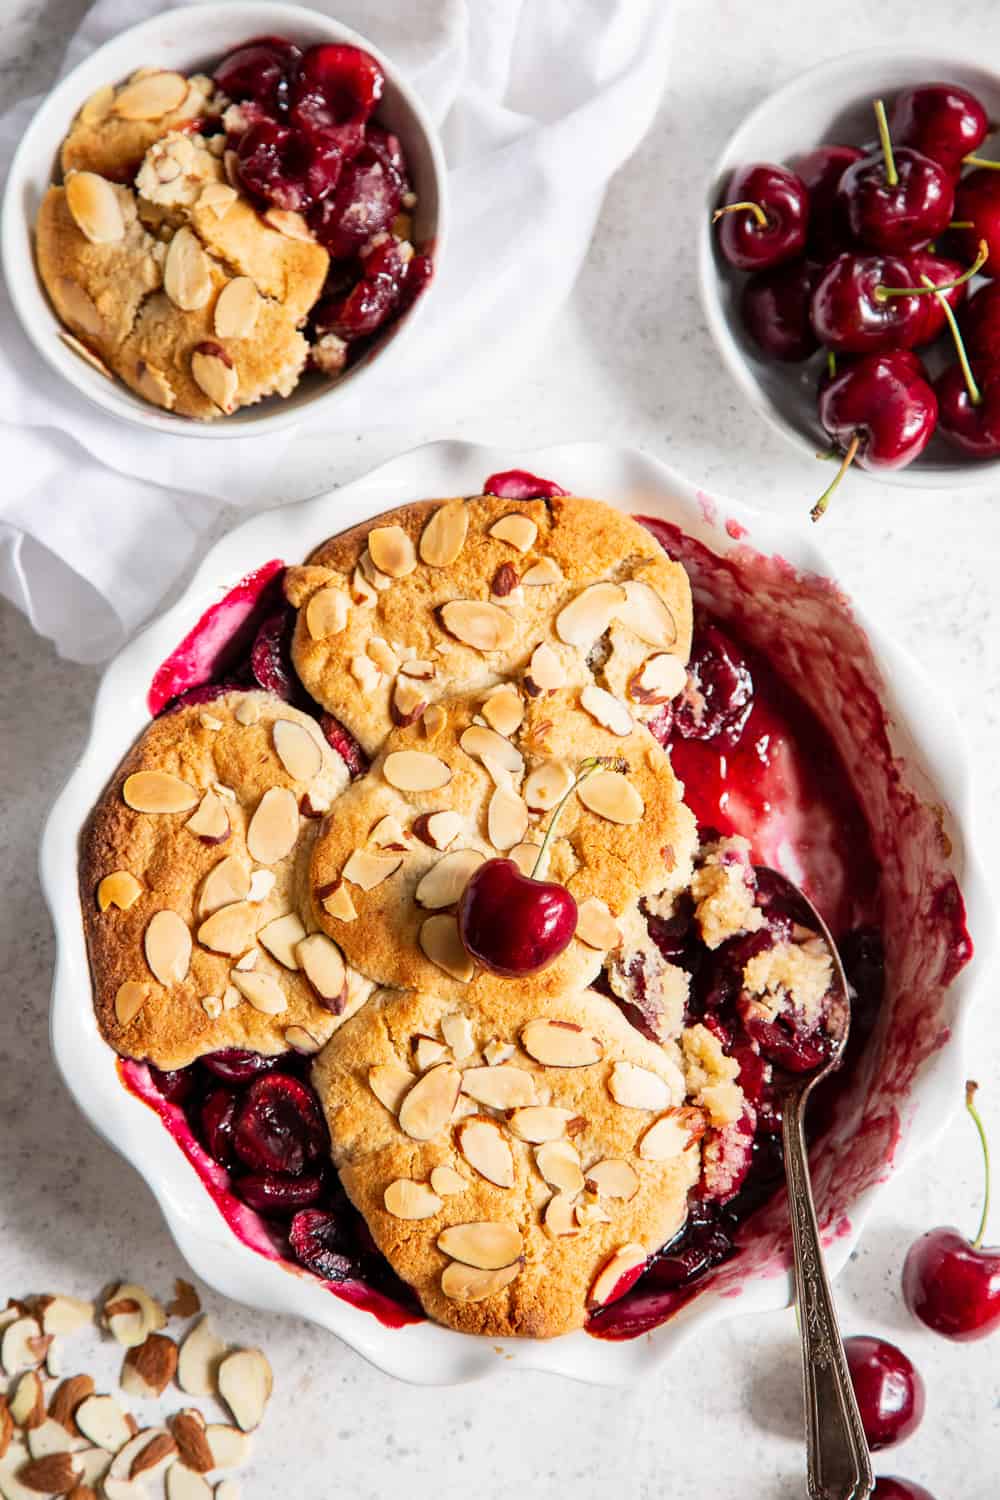 This paleo and vegan cherry almond cobbler is sure to become a family favorite.  A sweet fresh cherry filling is baked with a biscuit cobbler topping and toasty almonds that’s gluten free, dairy free, and egg free.  It’s perfect served with a big scoop of coconut vanilla ice cream or on its own!  Easy to make and the perfect healthy dessert for Summer. #ad @chelanfresh #cherries #paleo #vegan #glutenfree 